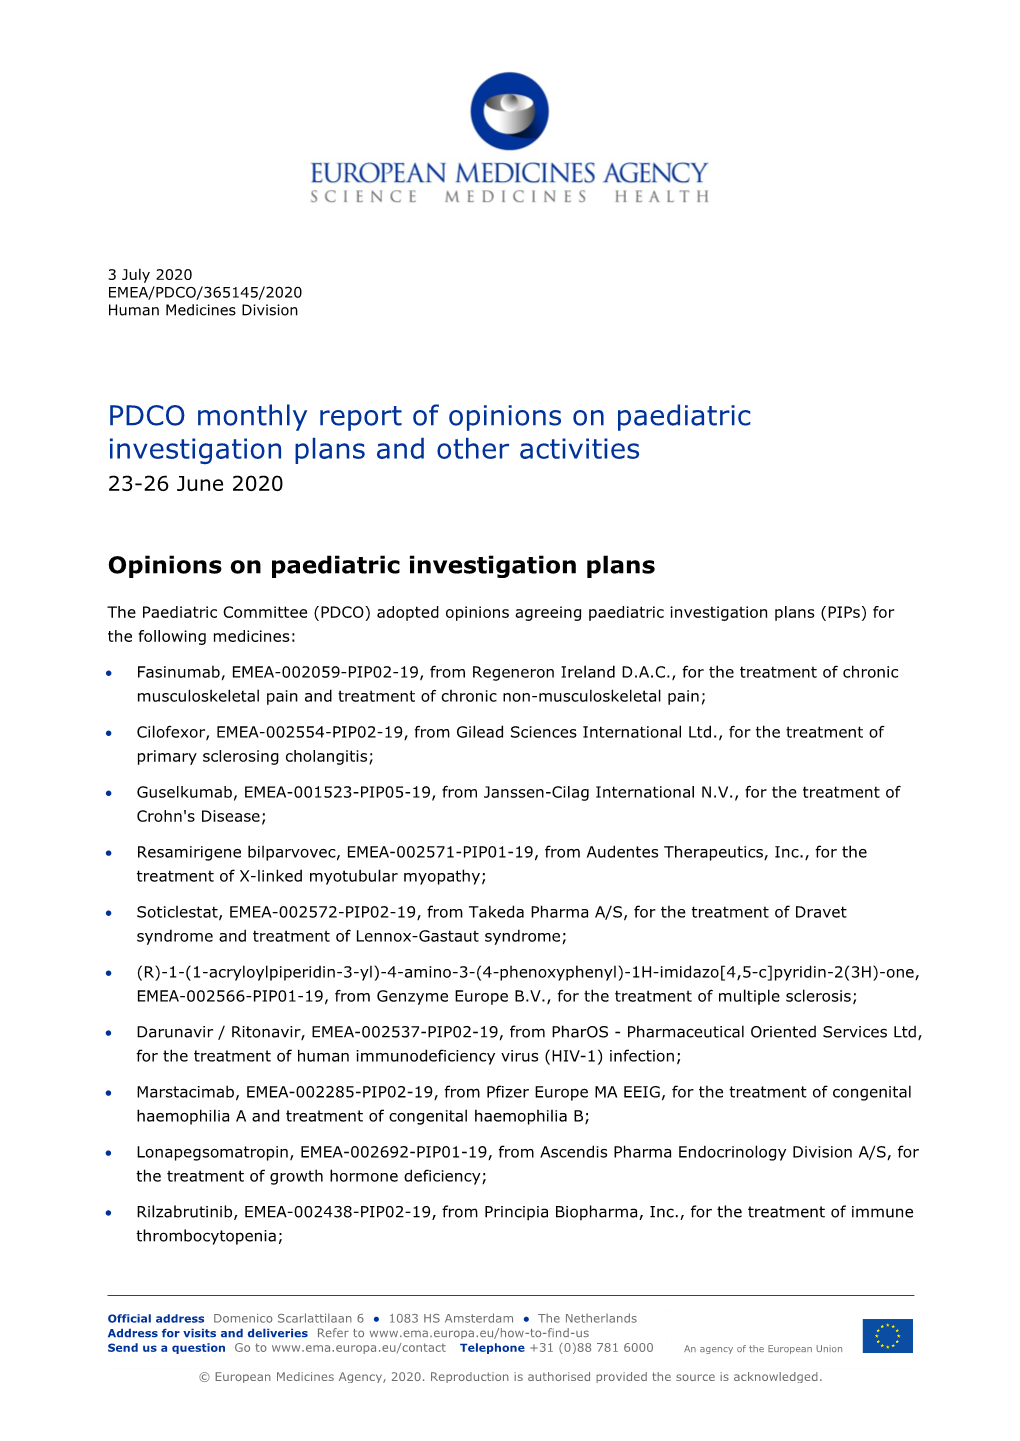 PDCO Monthly Report of Opinions on Paediatric Investigation Plans and Other Activities 23-26 June 2020